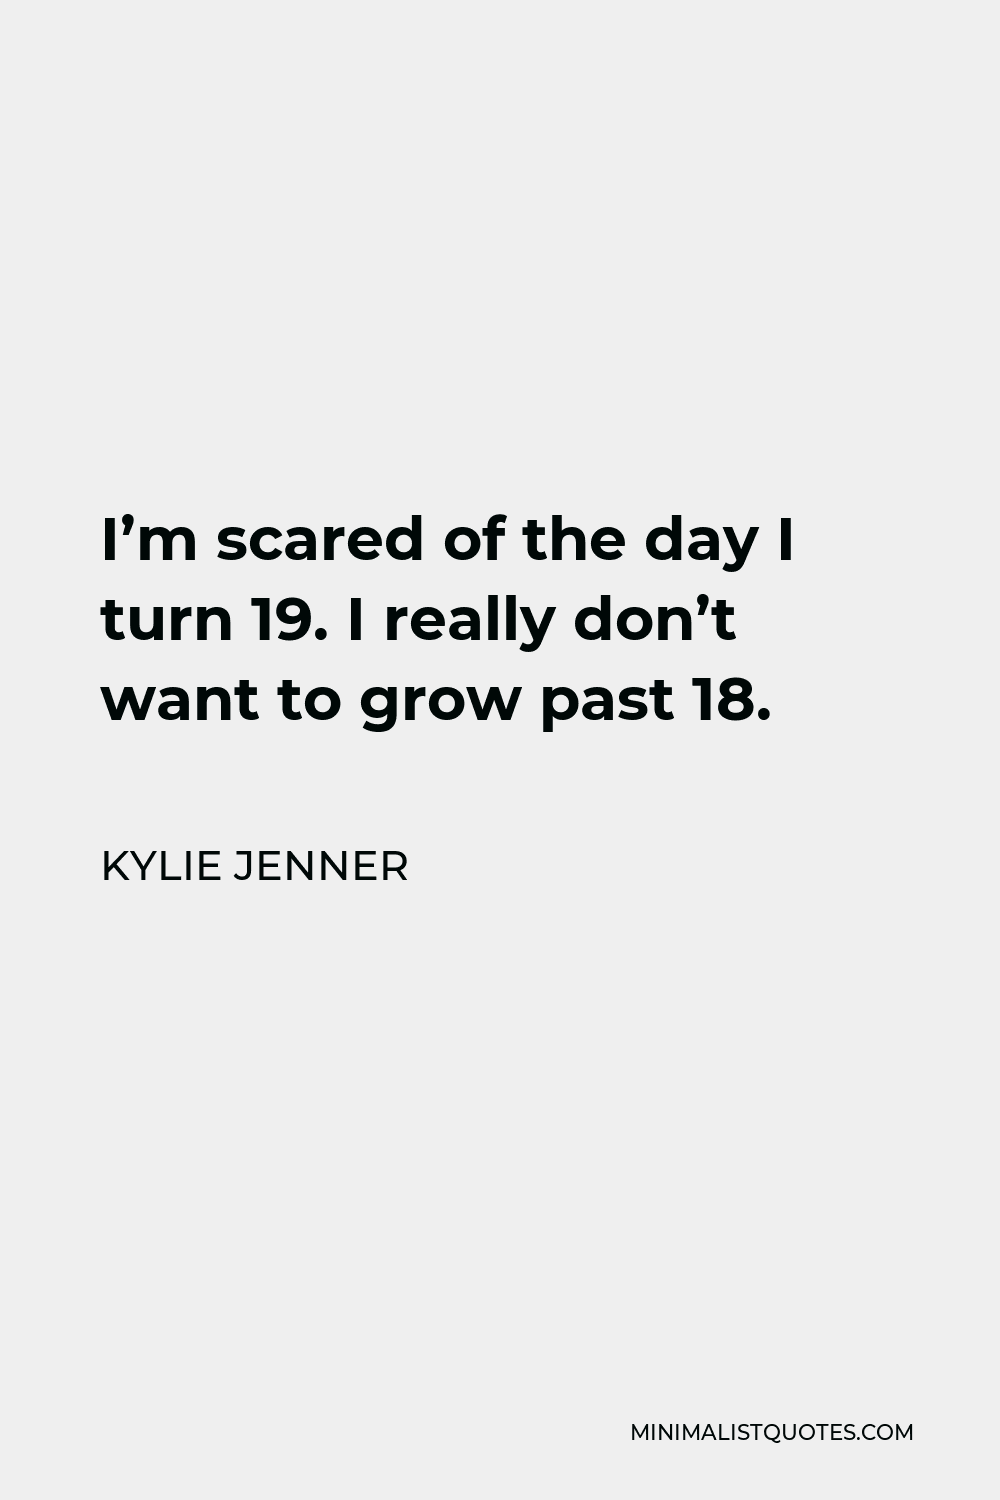 Kylie Jenner Quote - I’m scared of the day I turn 19. I really don’t want to grow past 18.